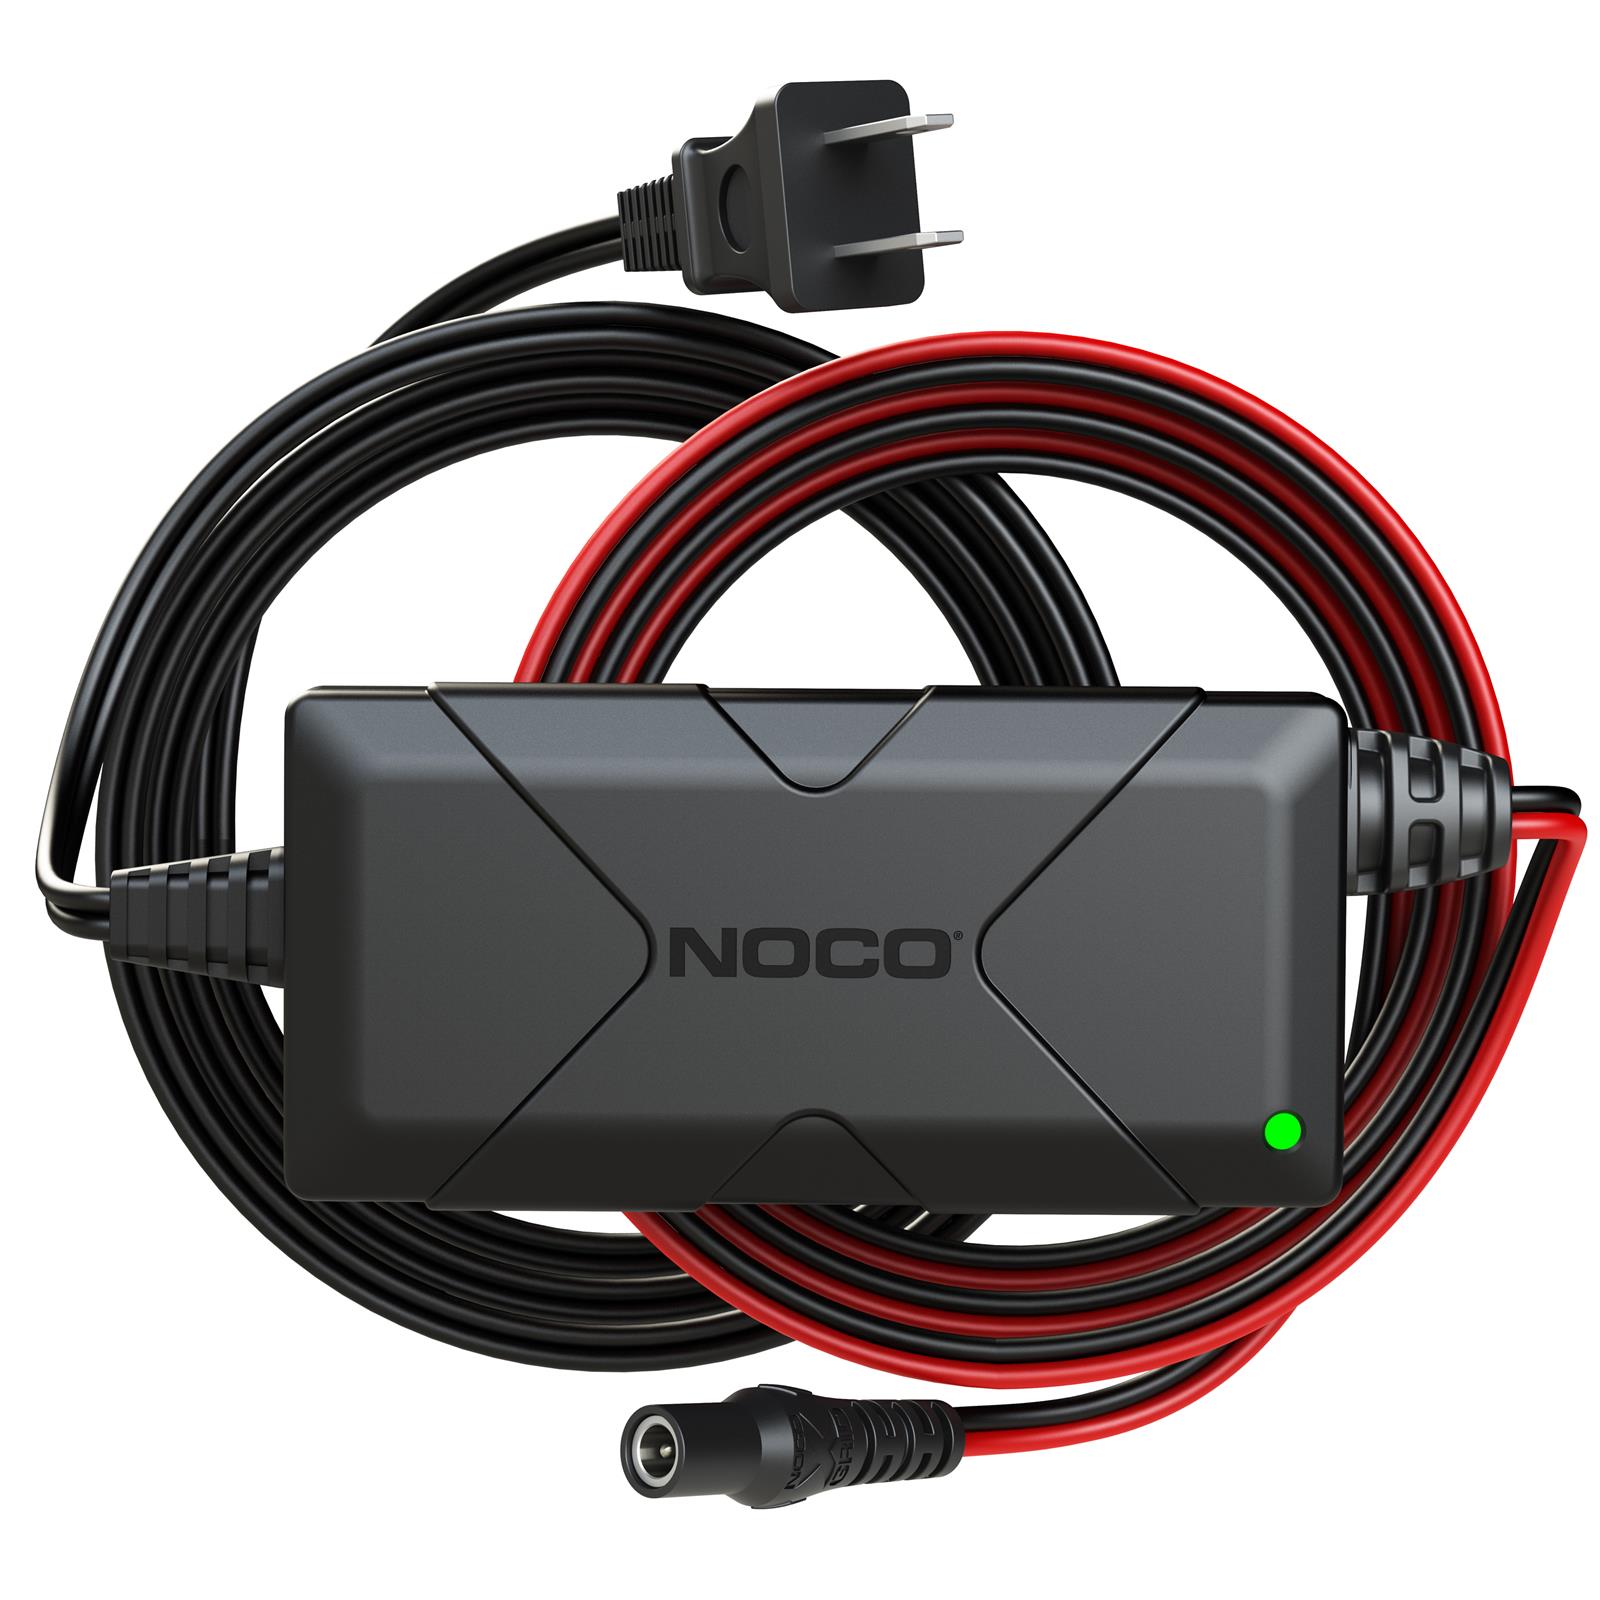 NOCO XGC4 NOCO Battery Charger Accessories